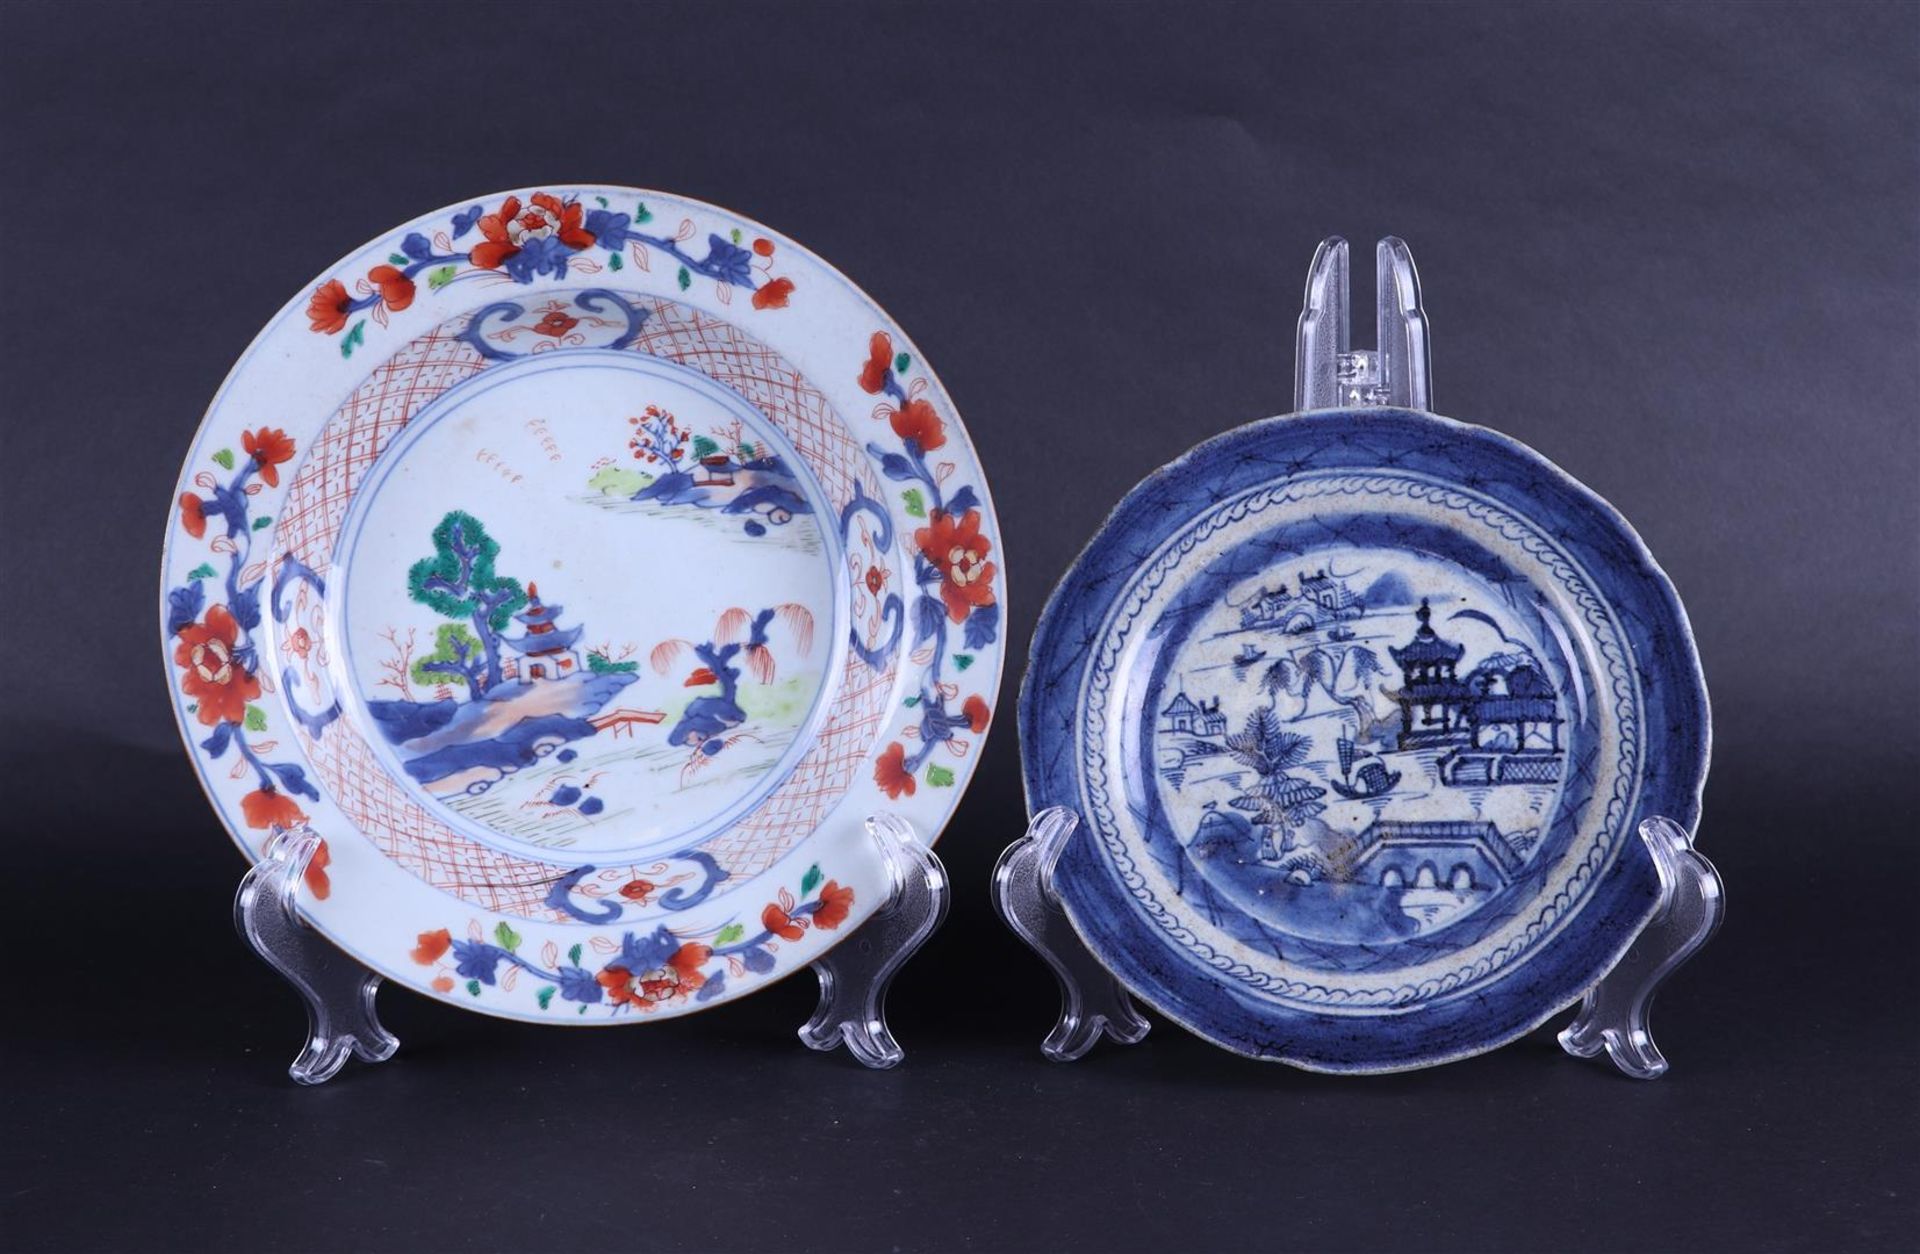 A lot consisting of two plates, one of which has an Imari decor. China, 18th century.